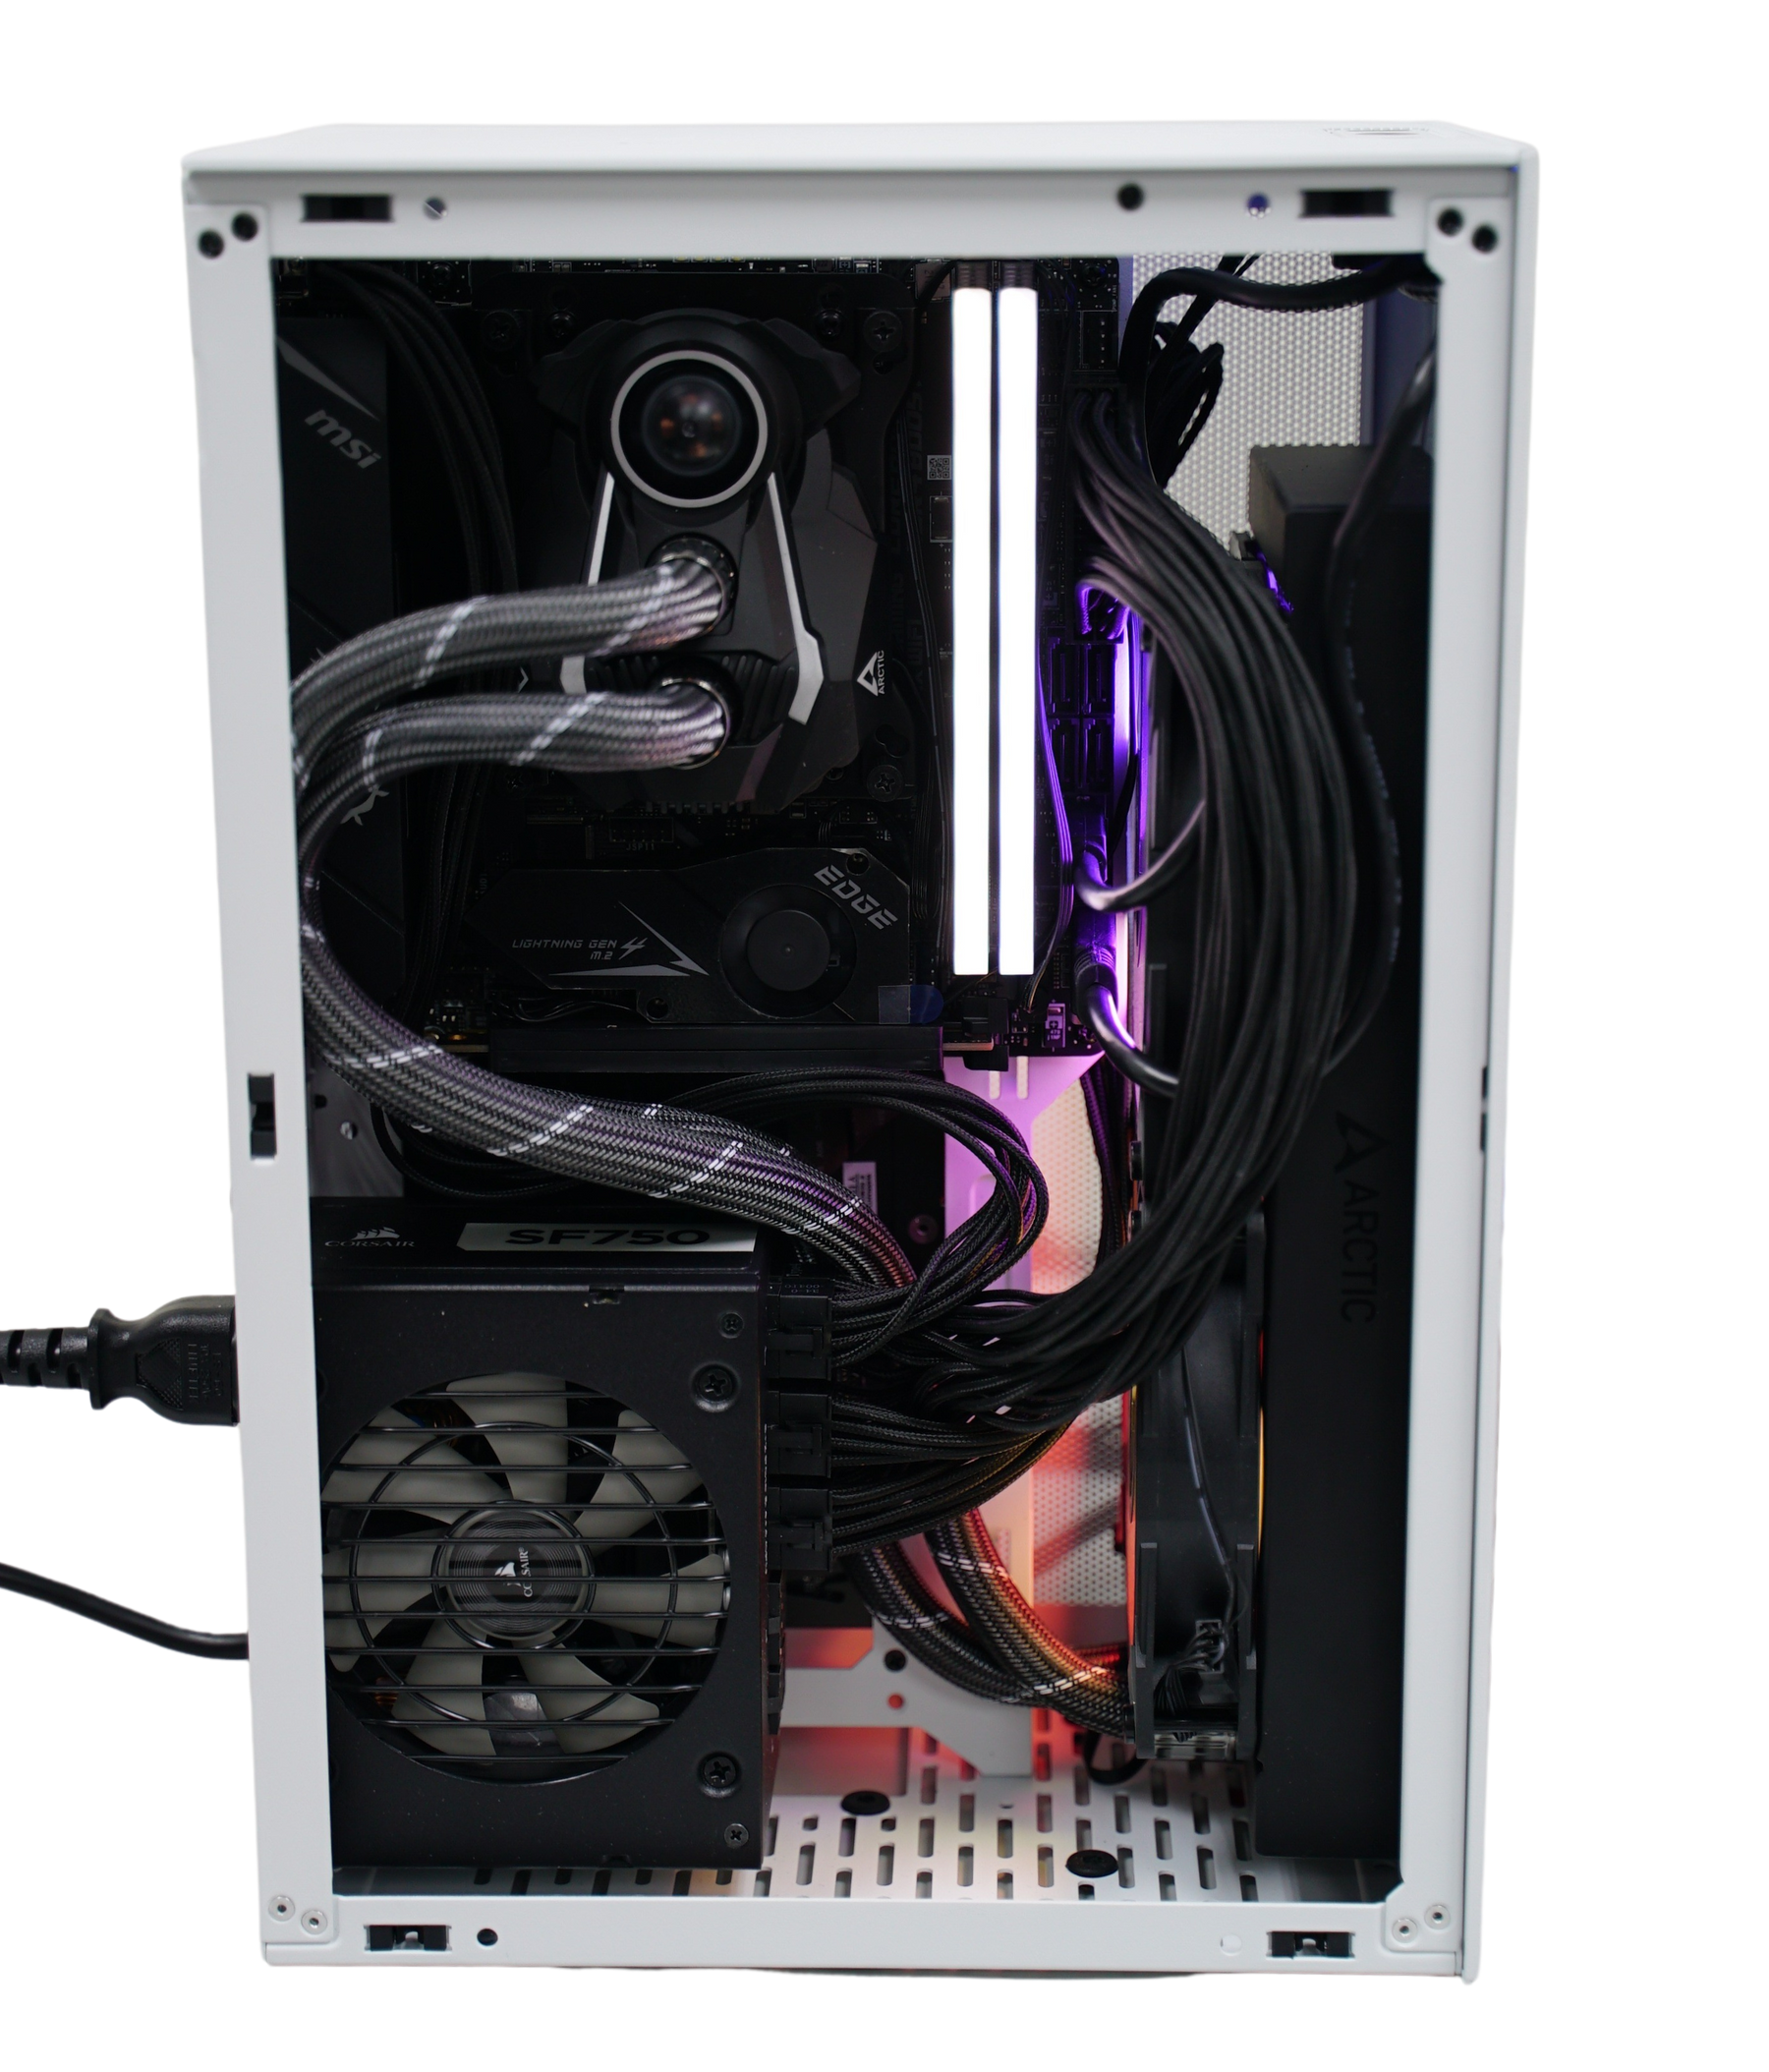 IronClad <b>Polaris</b> <br>Small-size Gaming Tower PC